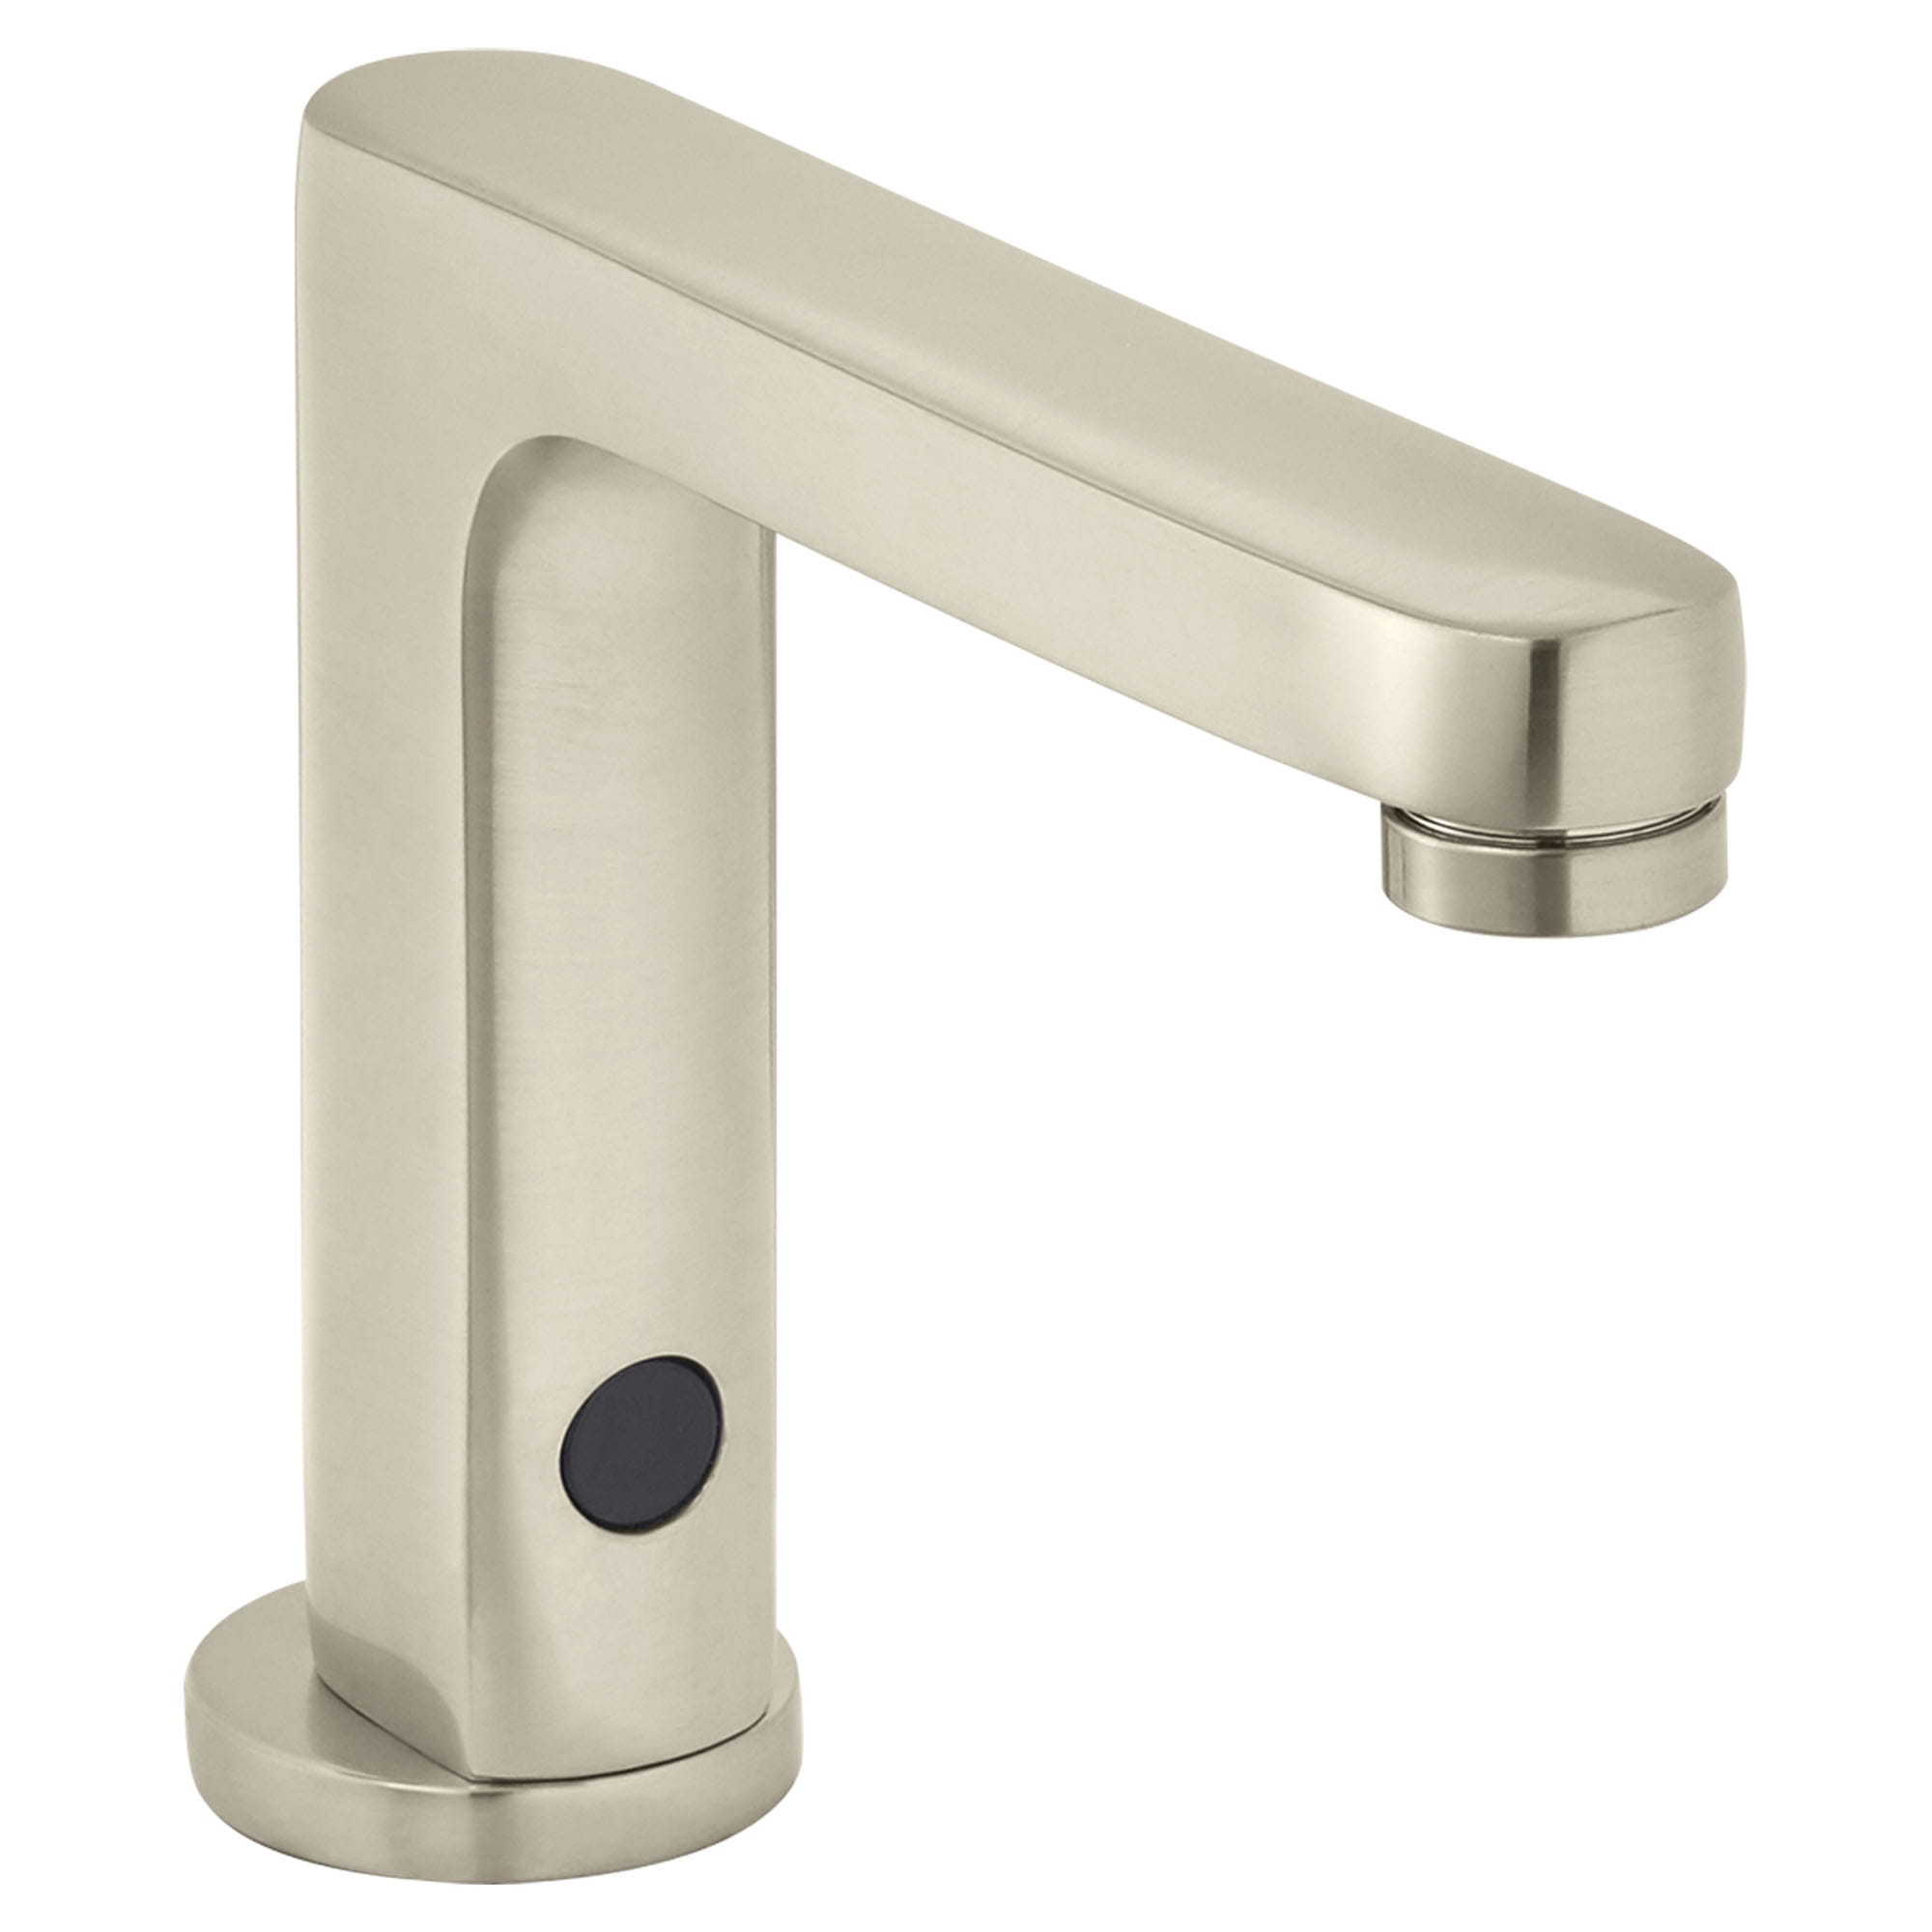 Moments Selectronic Touchless Faucet, PWRX 10 Year Battery, 1.5 gpm/5.7 Lpm